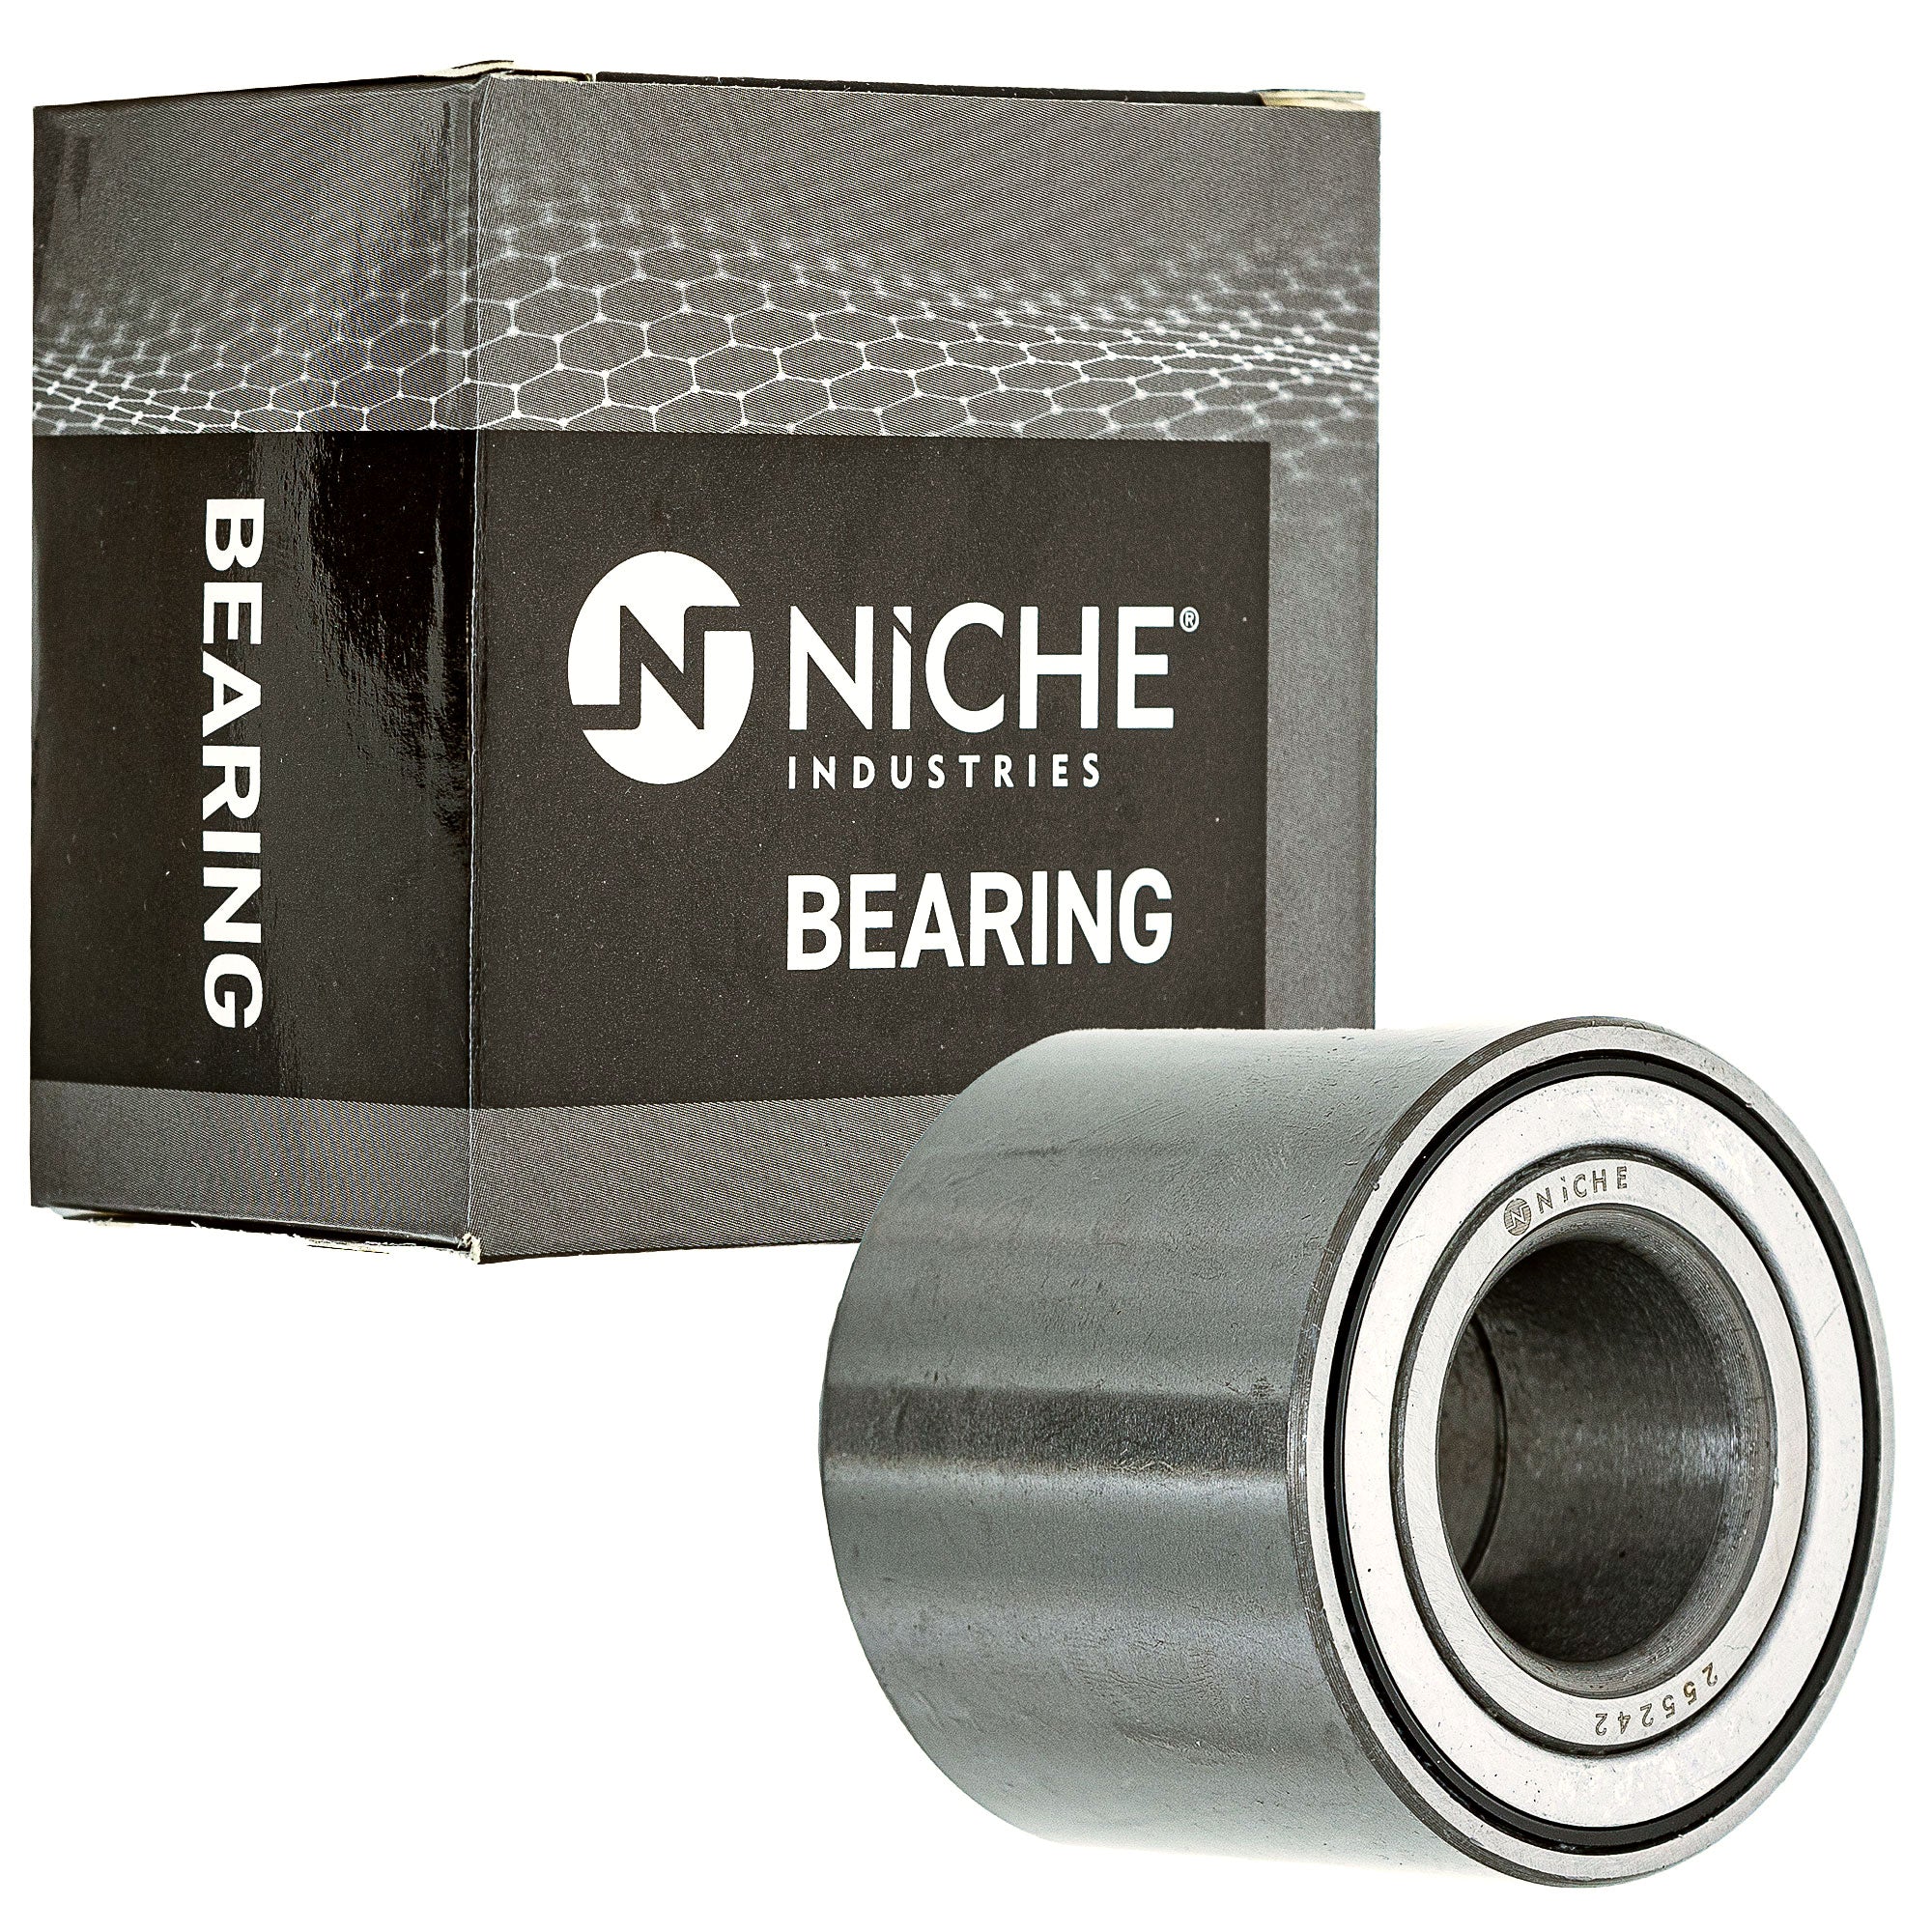 NICHE 519-CBB2206R Bearing 2-Pack for zOTHER Teryx Sportsman Renegade